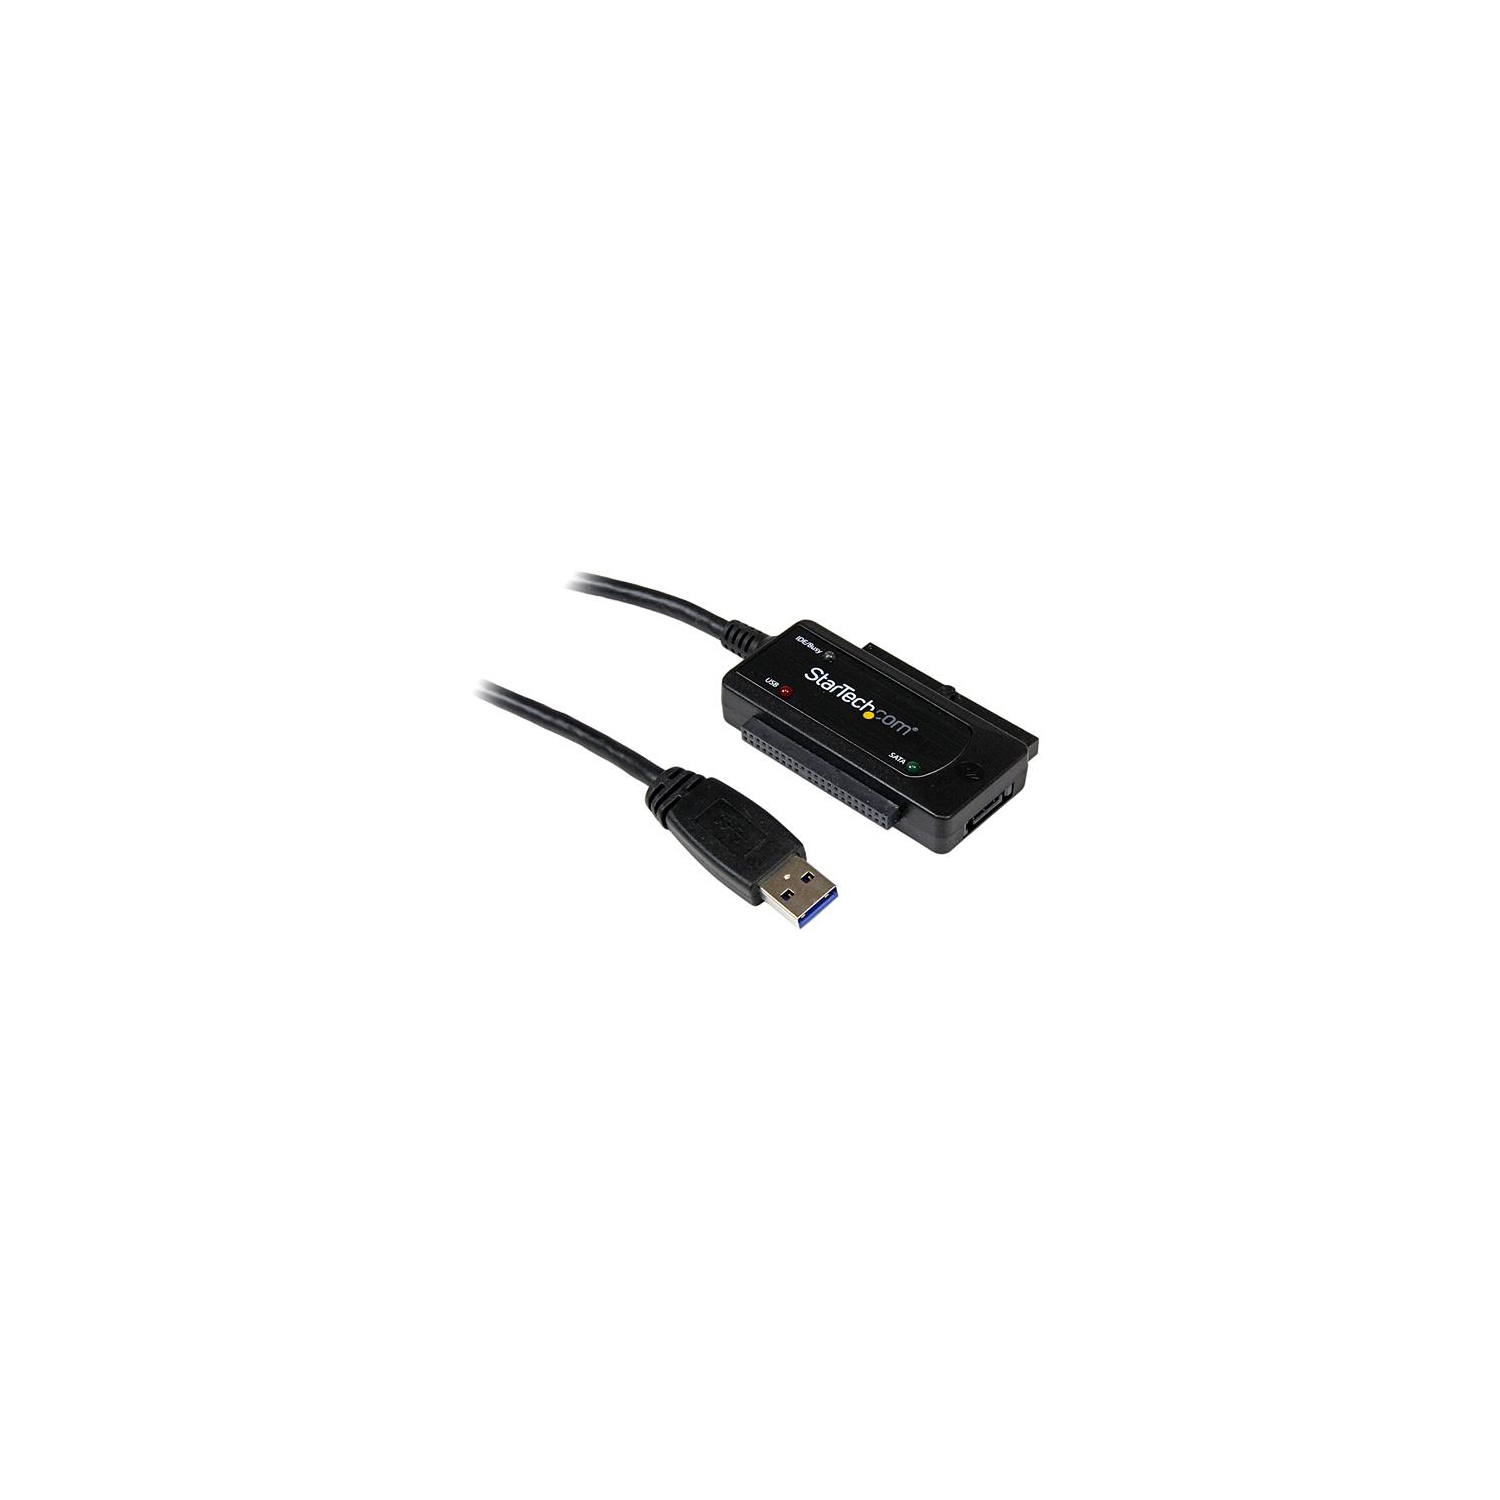 usb to ide/sata adapter best buy